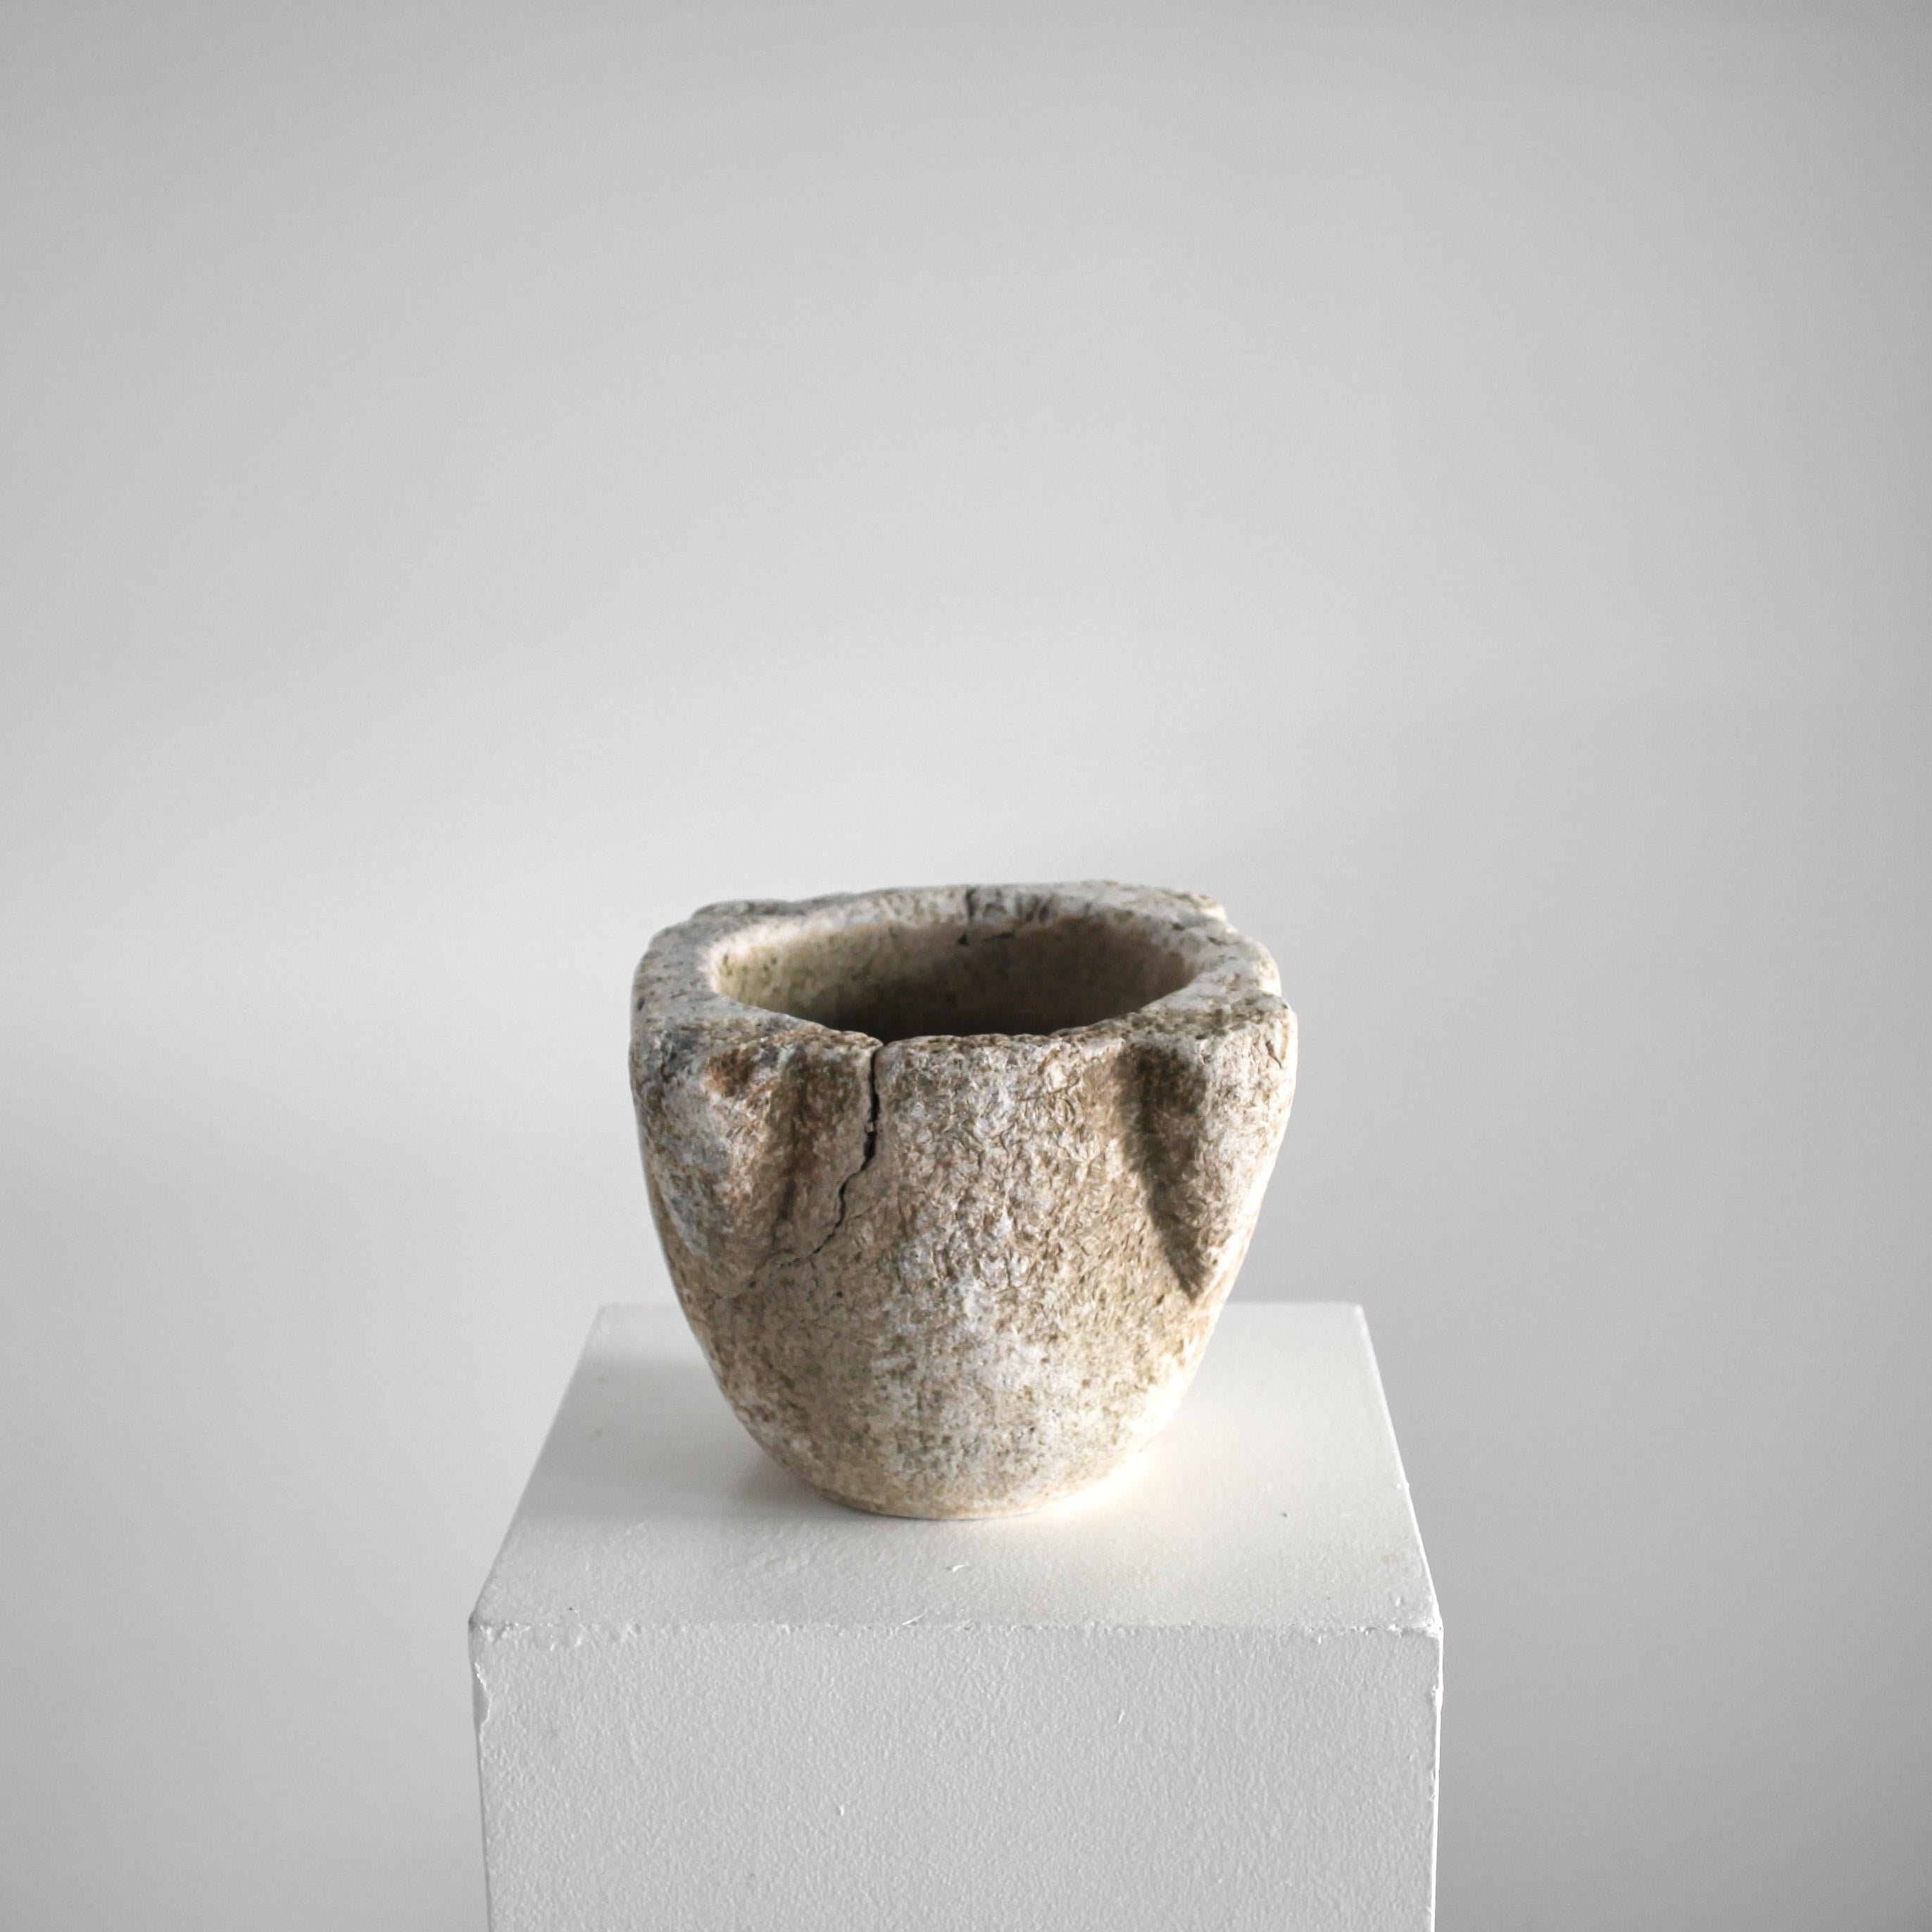 An XL hand carved Catalan stone mortar from the 18th C.

Heavily worn with exceptional patination & lovely light colour.